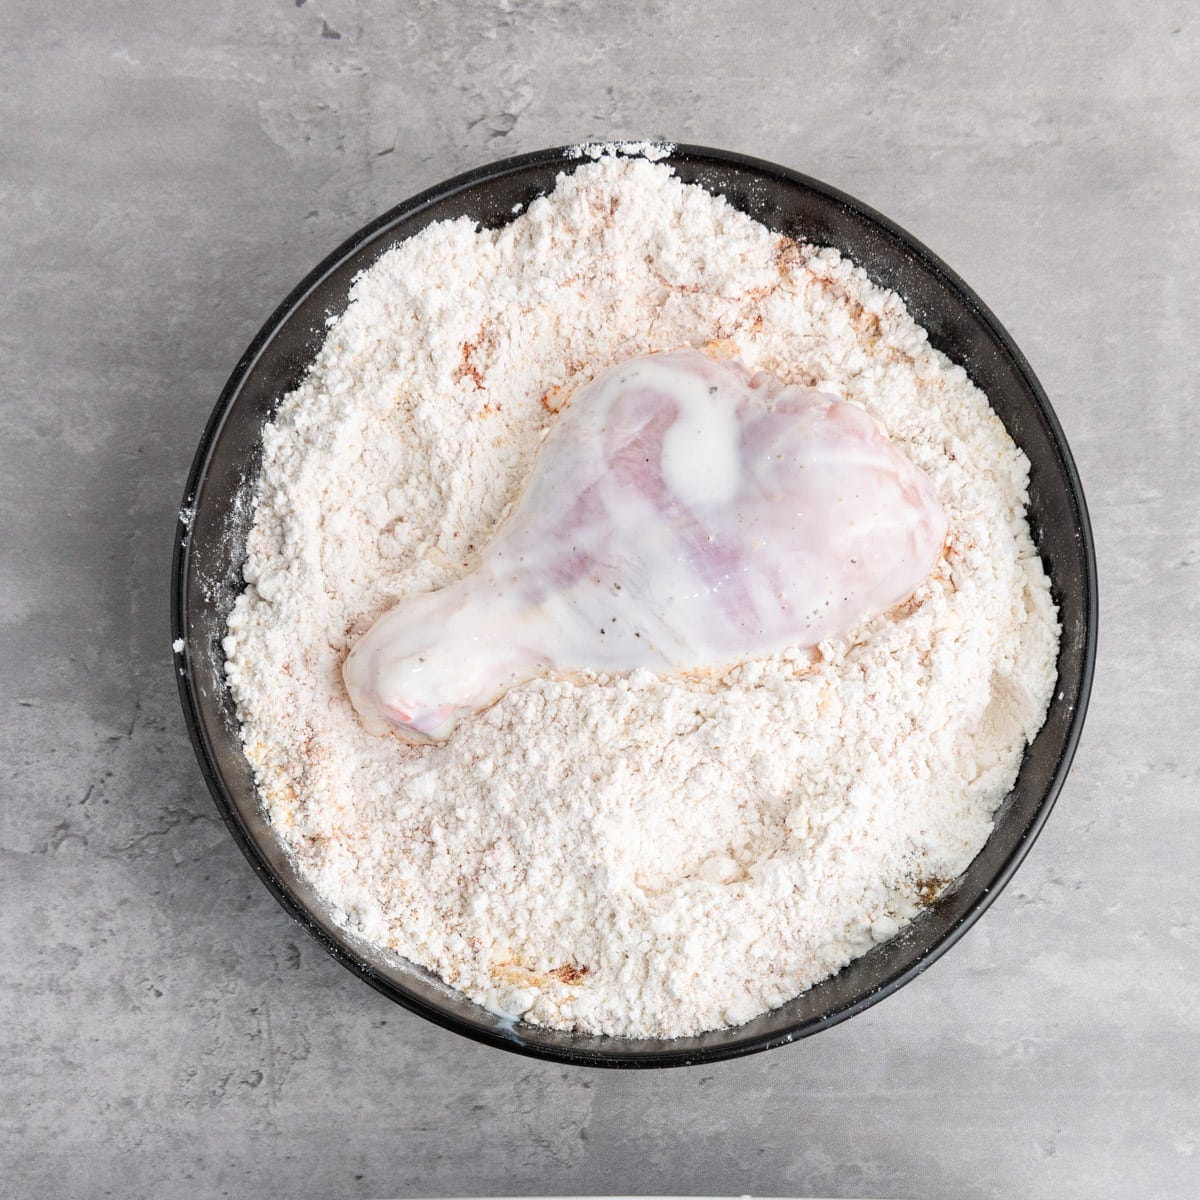 Buttermilk-coated chicken drumstick sitting on top of a bowl of flour.